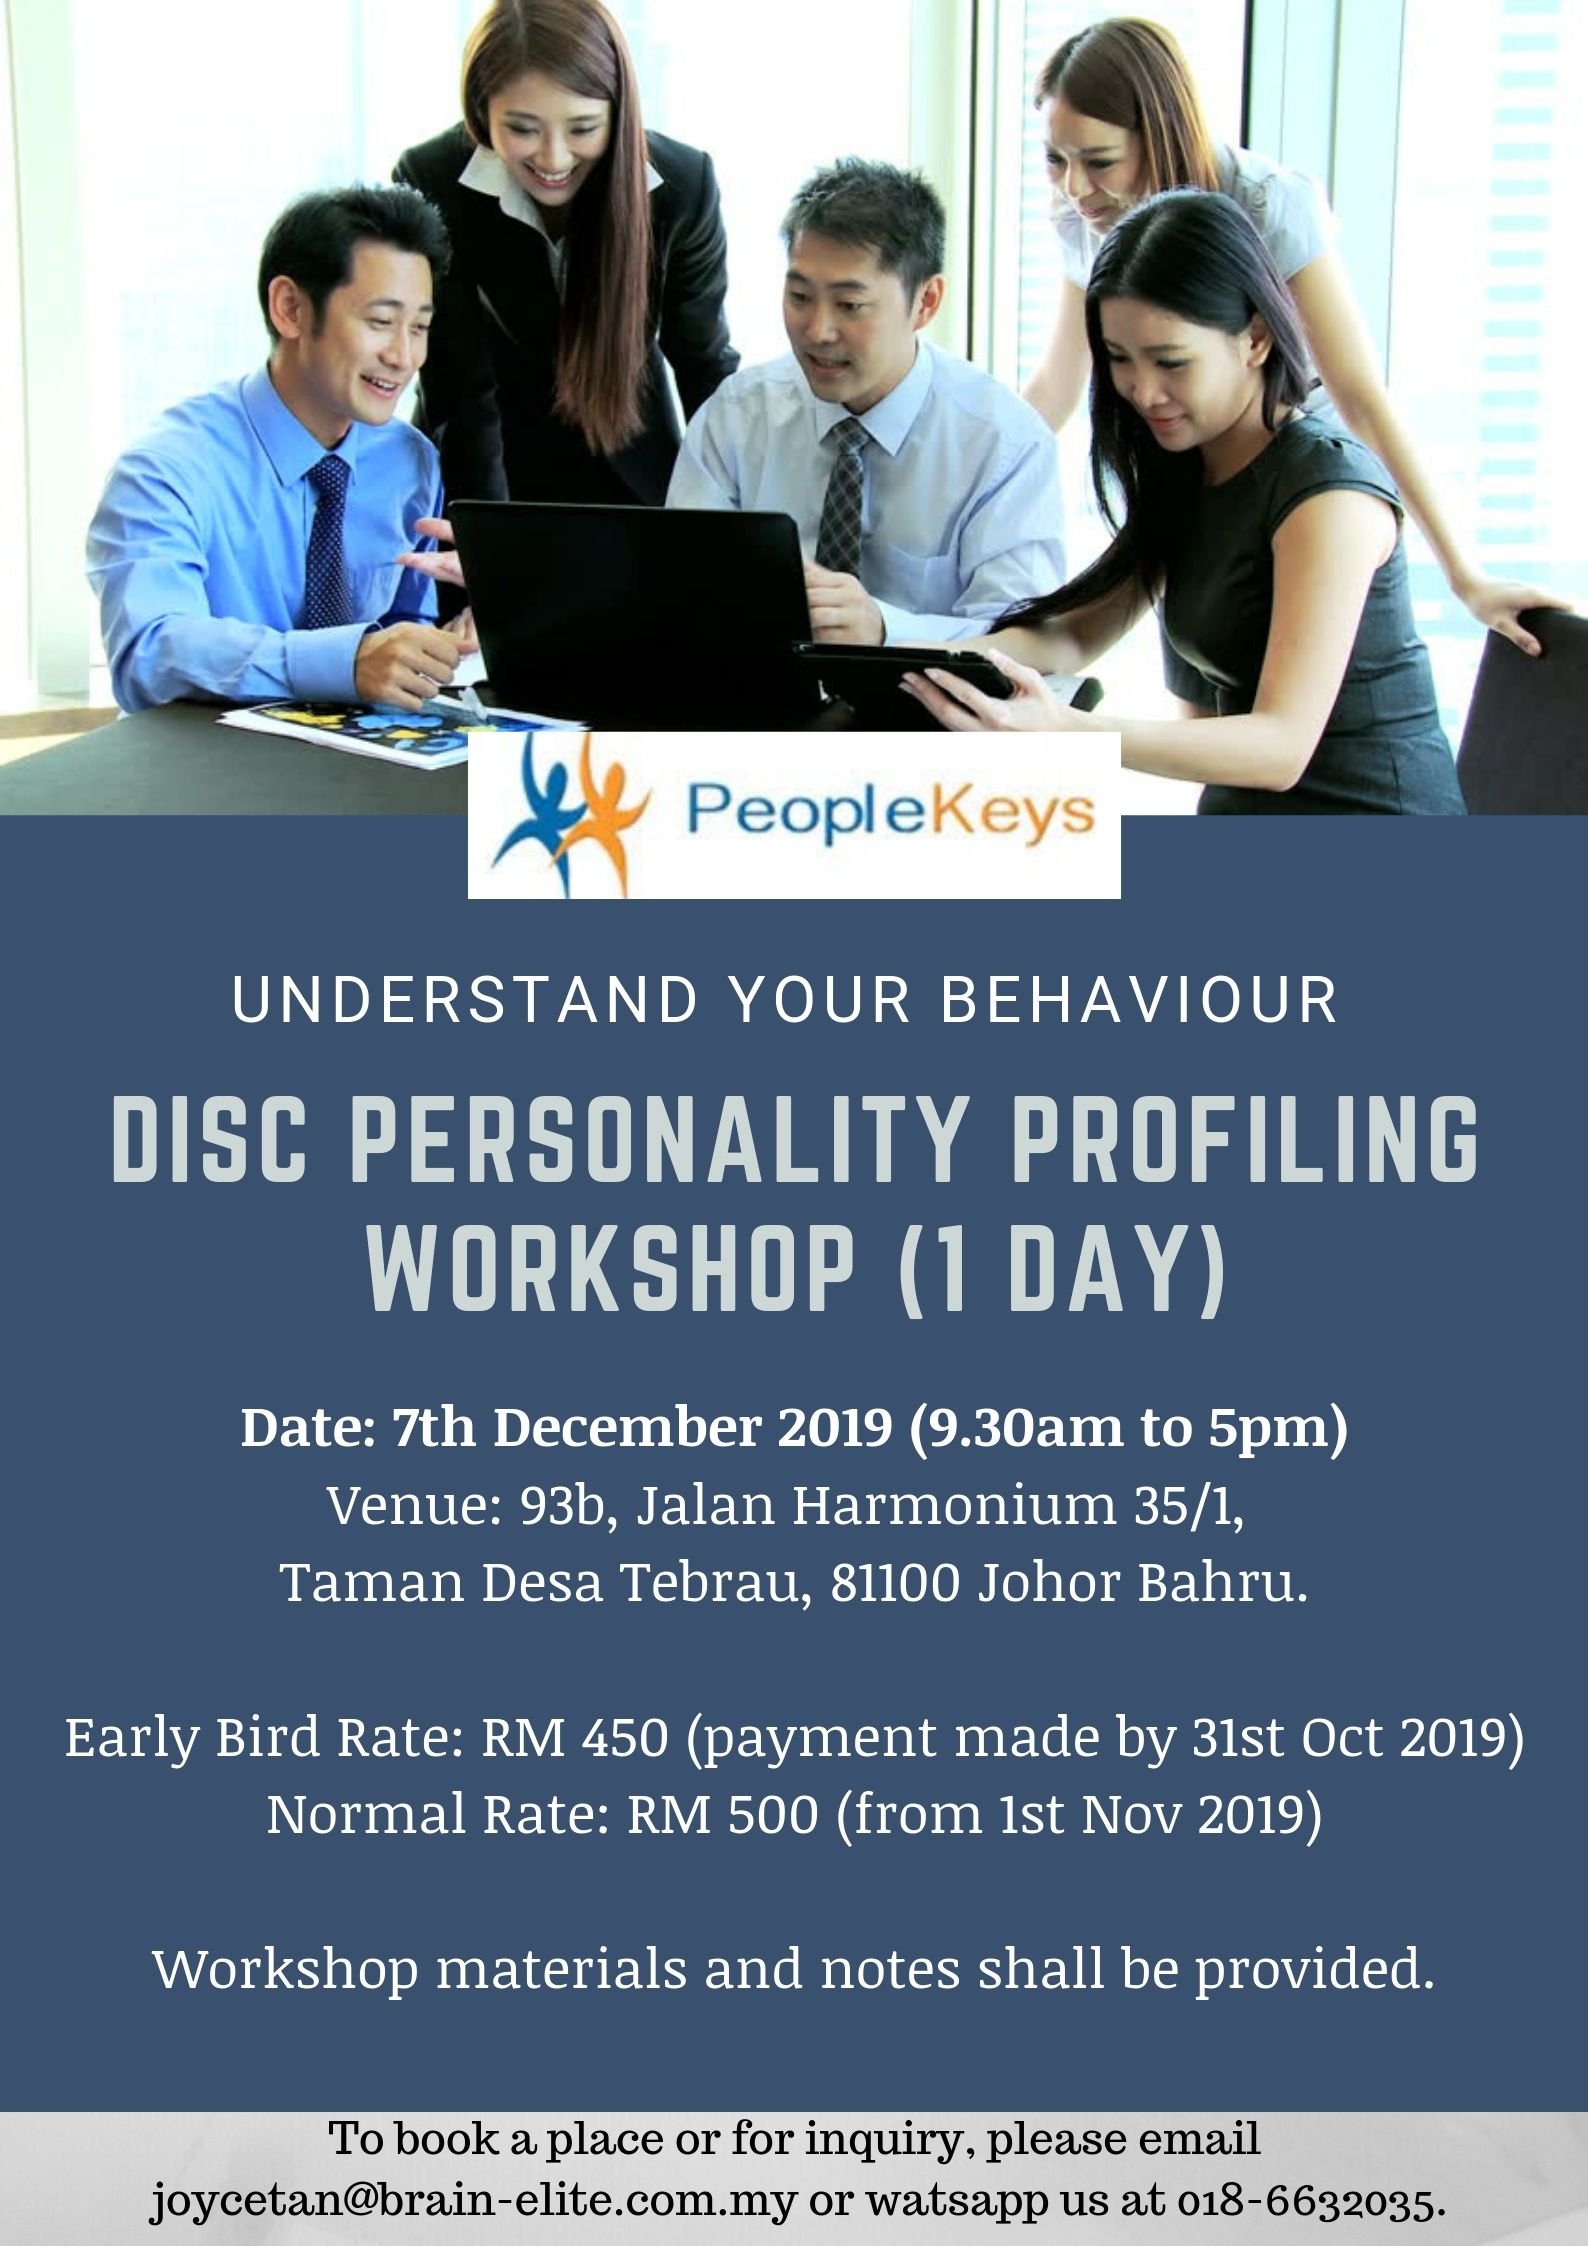 DISC Personality Profiling Workshop (1 day)